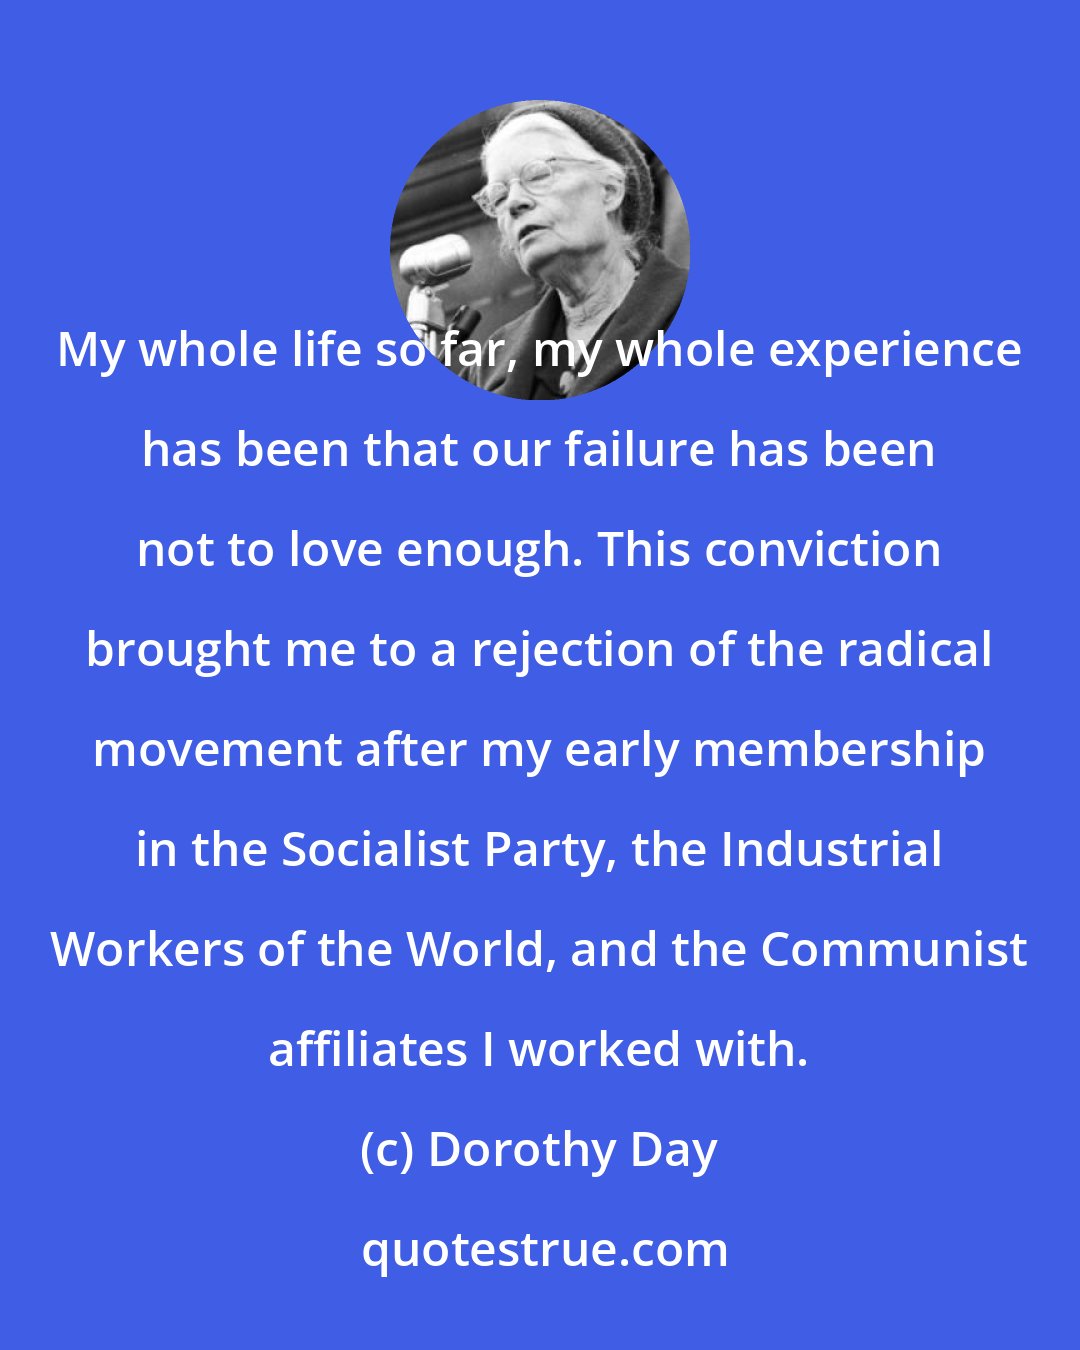 Dorothy Day: My whole life so far, my whole experience has been that our failure has been not to love enough. This conviction brought me to a rejection of the radical movement after my early membership in the Socialist Party, the Industrial Workers of the World, and the Communist affiliates I worked with.